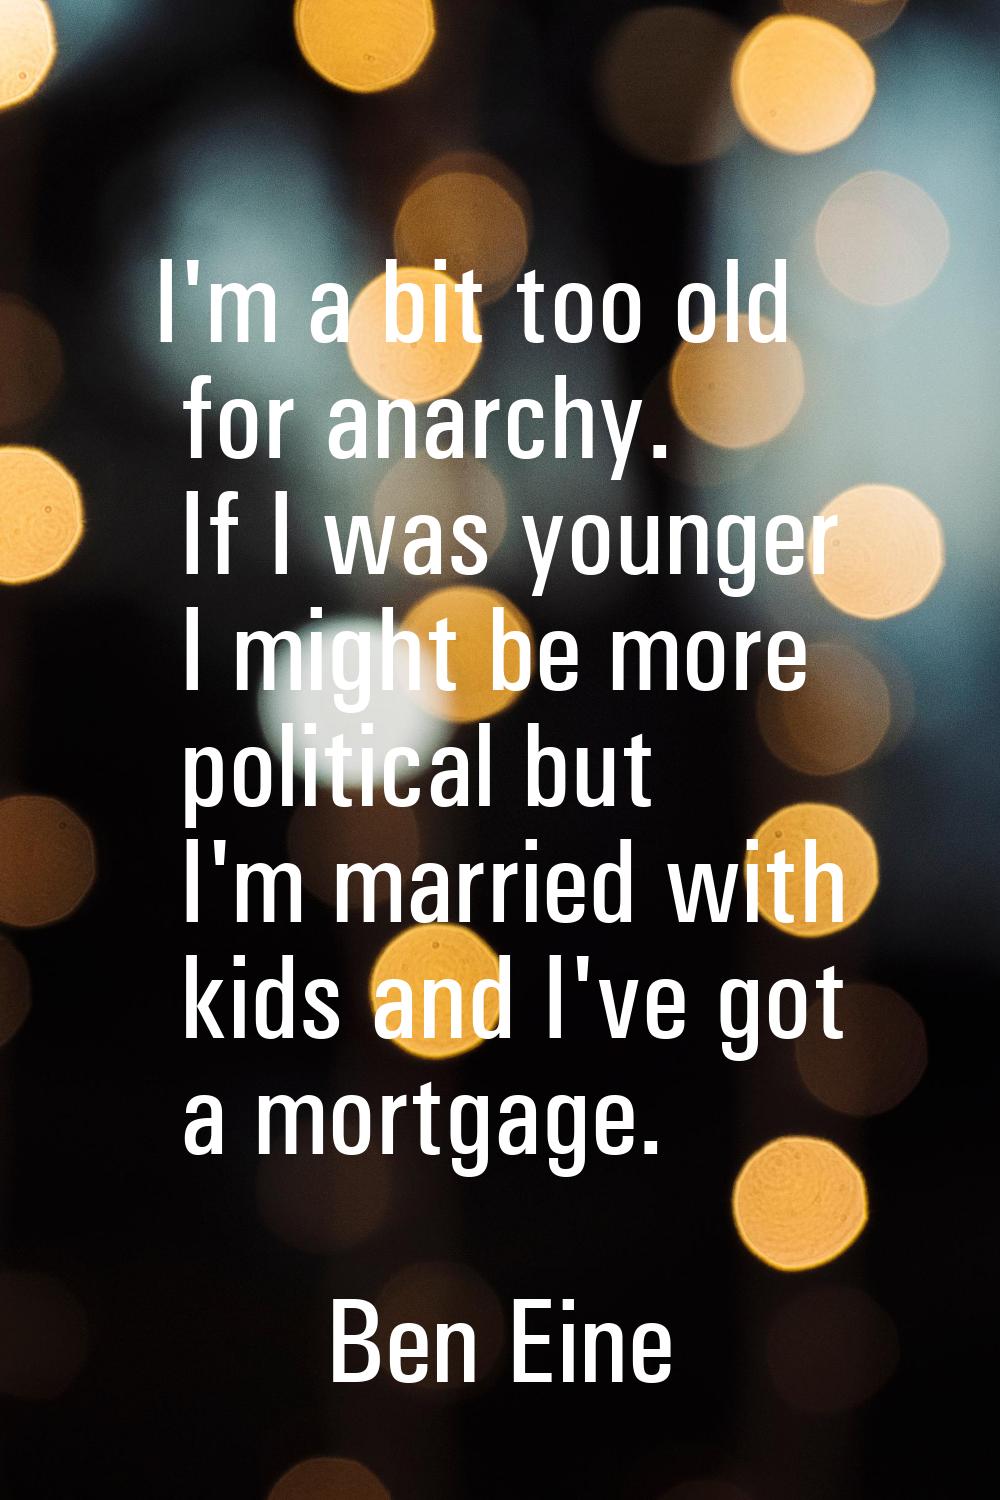 I'm a bit too old for anarchy. If I was younger I might be more political but I'm married with kids